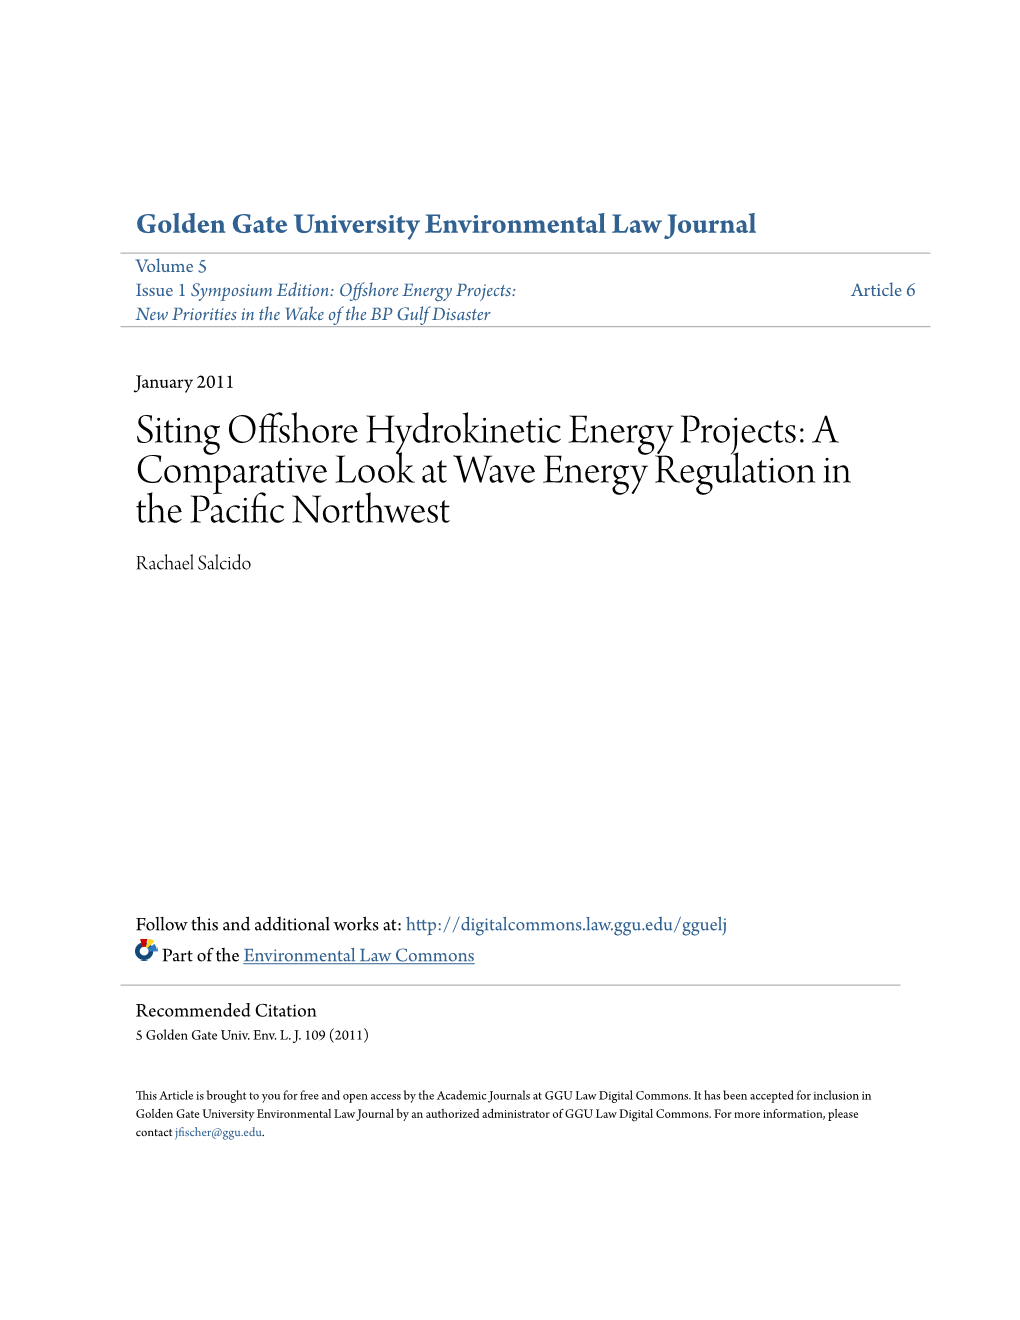 Siting Offshore Hydrokinetic Energy Projects: a Comparative Look at Wave Energy Regulation in the Pacific Orn Thwest Rachael Salcido